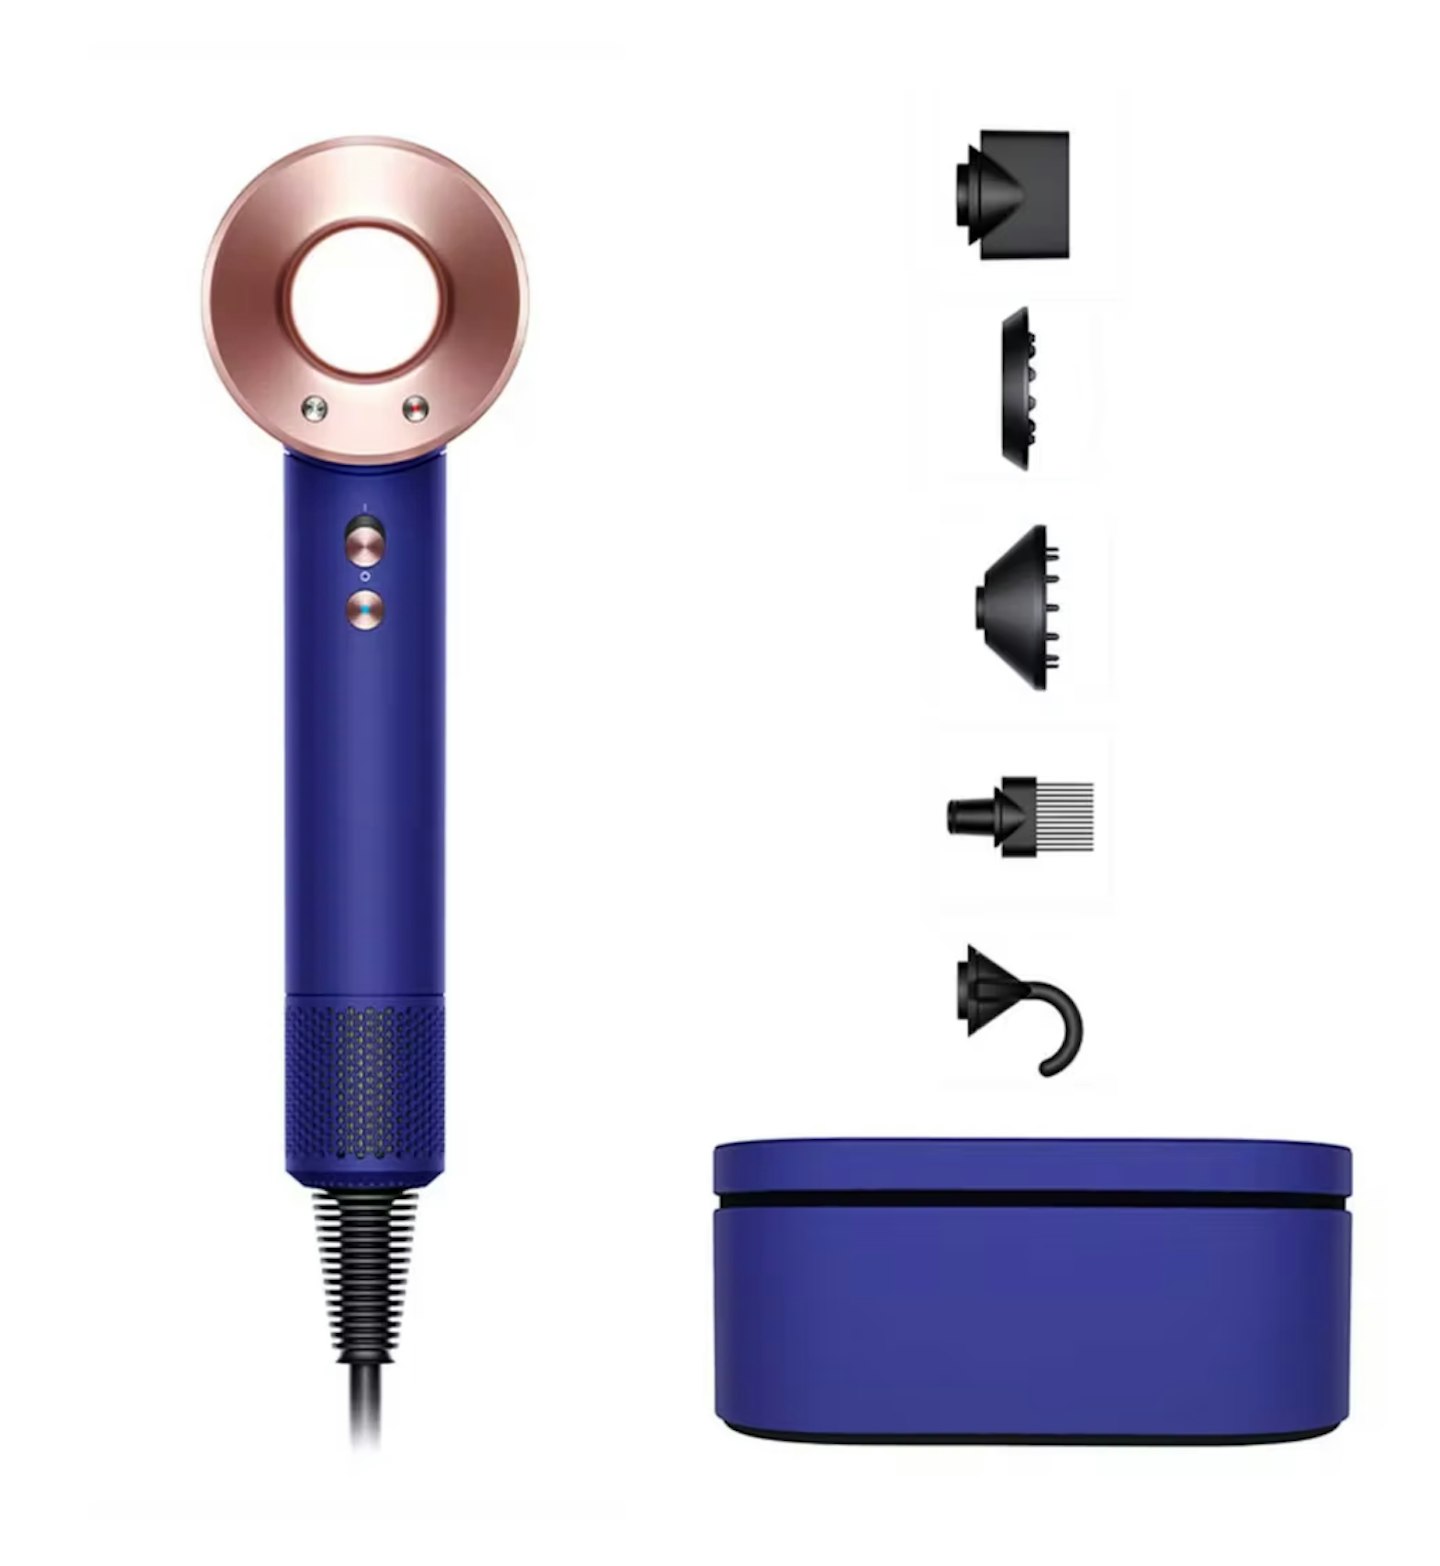 Dyson Supersonic Hair Dryer in Vinca blue and Rosé